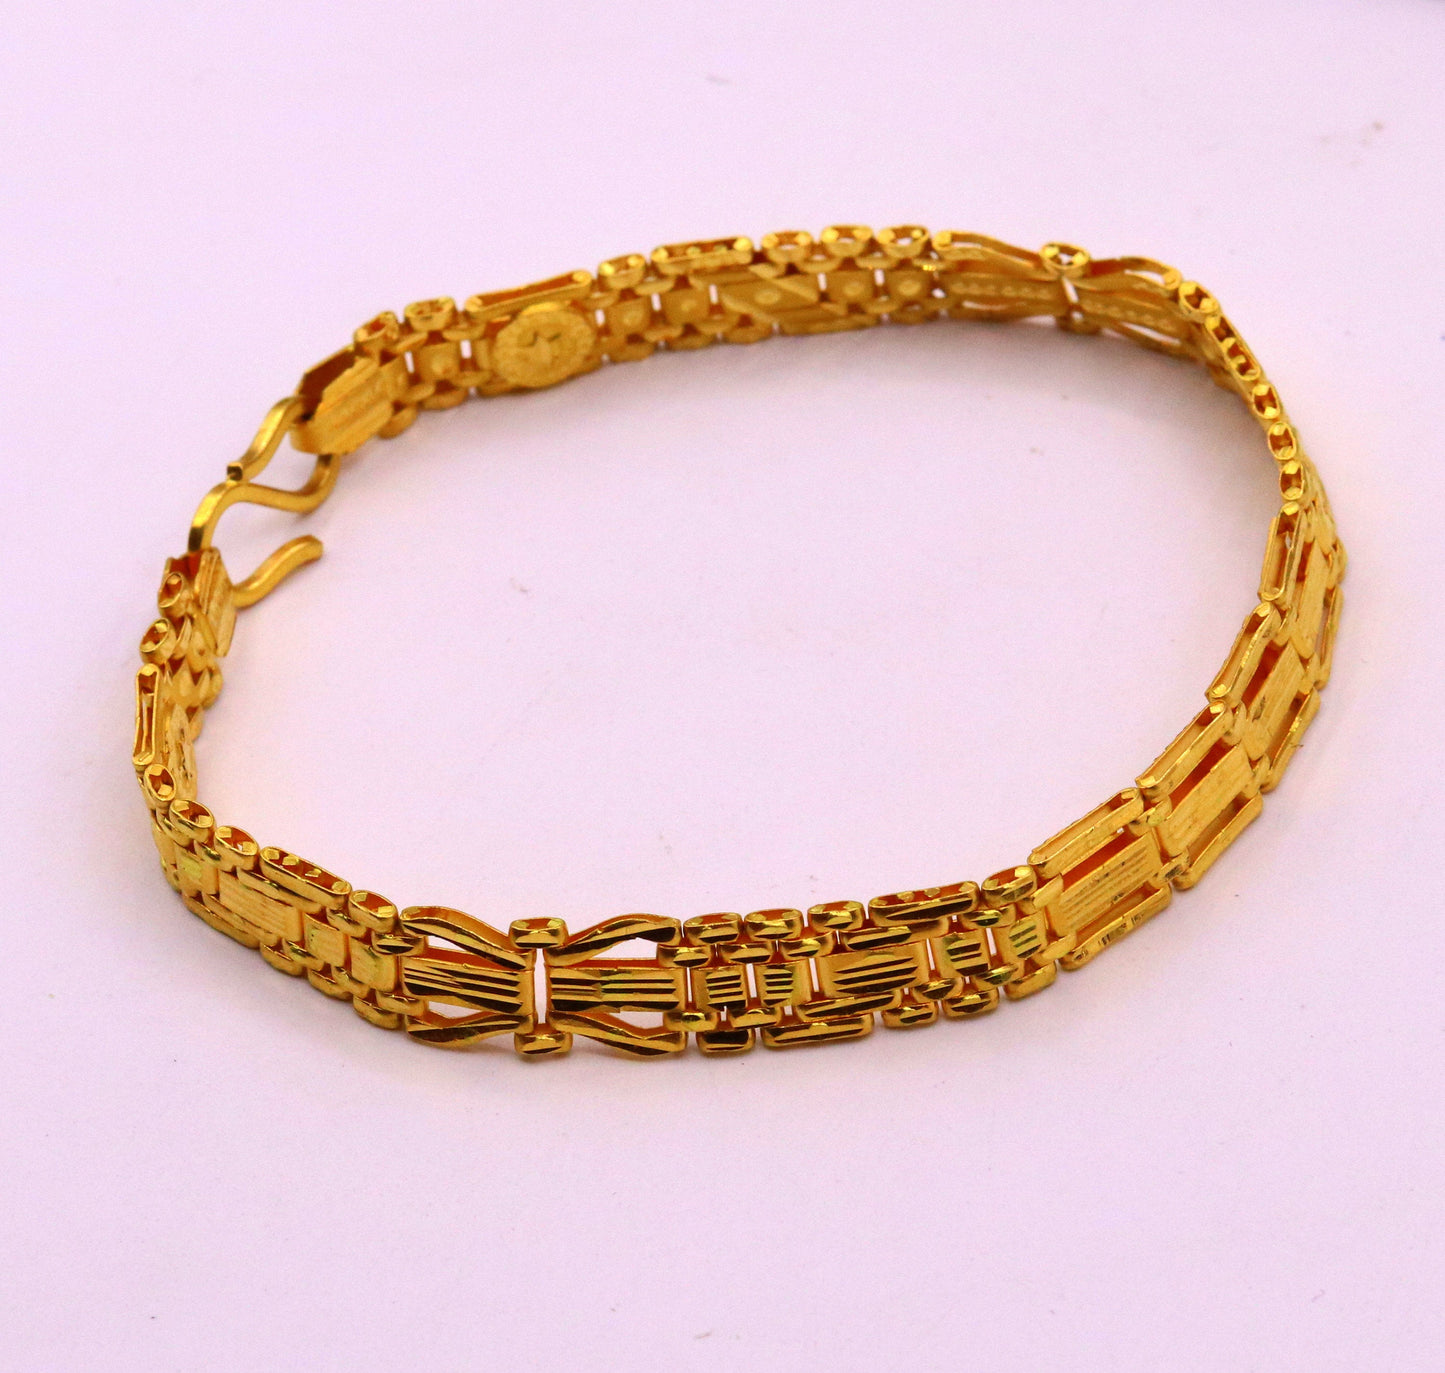 Certified 22kt yellow gold handmade excellent solid flexible link bracelet unisex gifting from Rajasthan india - TRIBAL ORNAMENTS